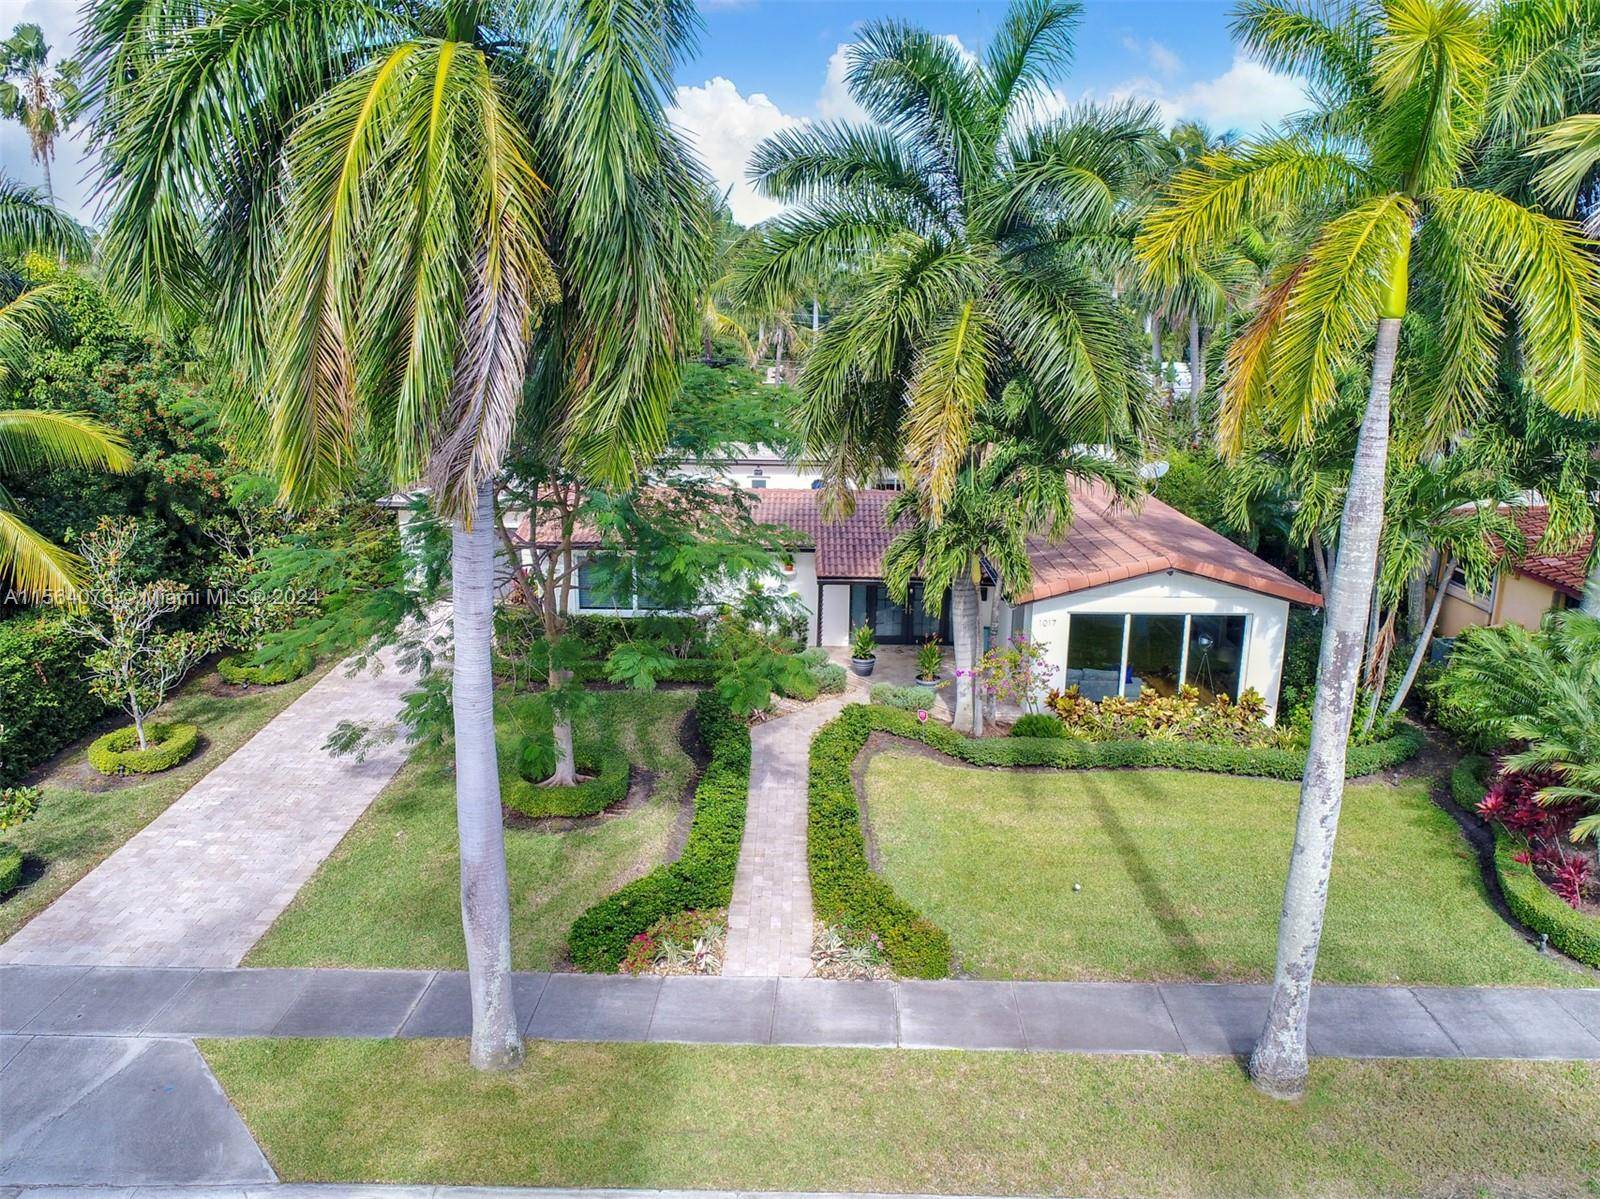 Paradise for Family in Miami Hollywood This Amazing property is difficult to describe in just a few words because it has so many outstanding features Hollywood TYLER STREET 1017 Lot ...